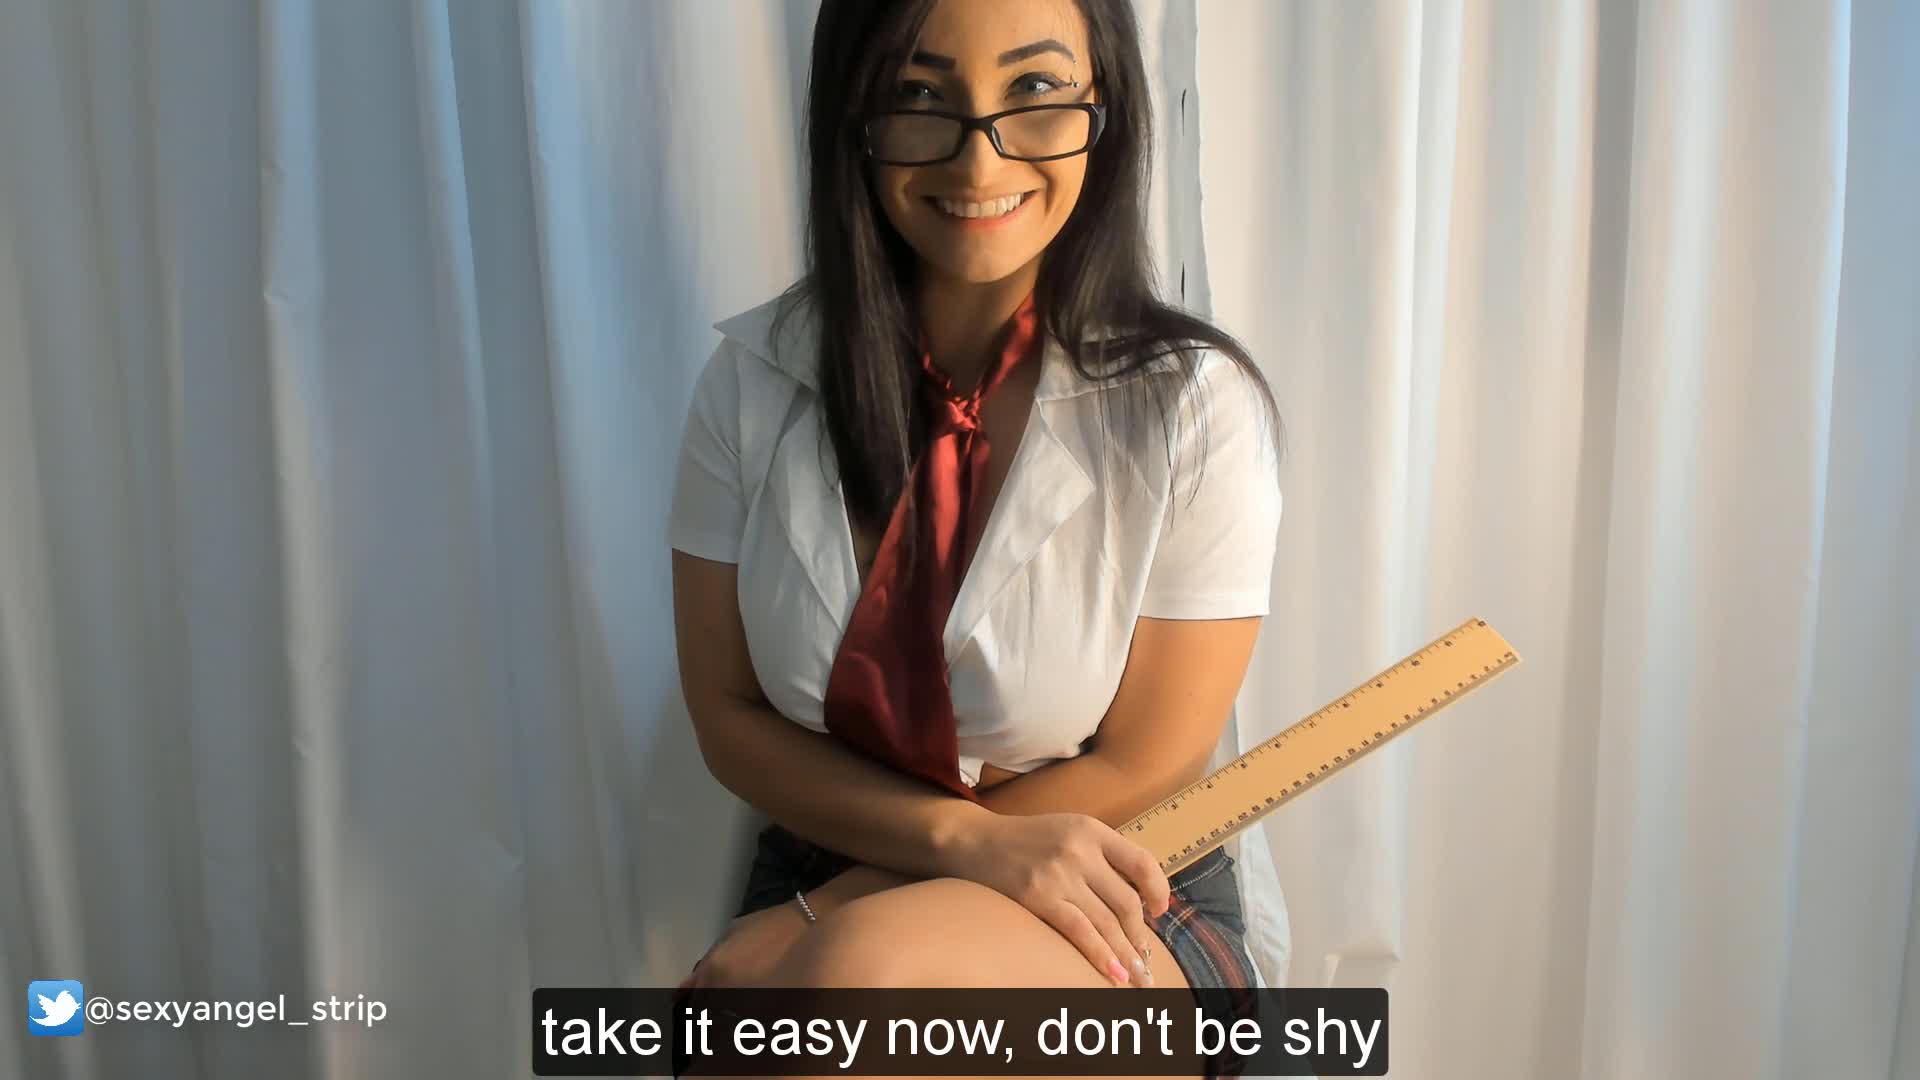 NAUGHTY TEACHER ROLEPLAY WITH A BRUNETTE MILF SHOWING OFF HER TITS TO THE STUDENT AND GETTING THE VEINY BIG DILDO COMPLETELY SUCKED - Videos picture